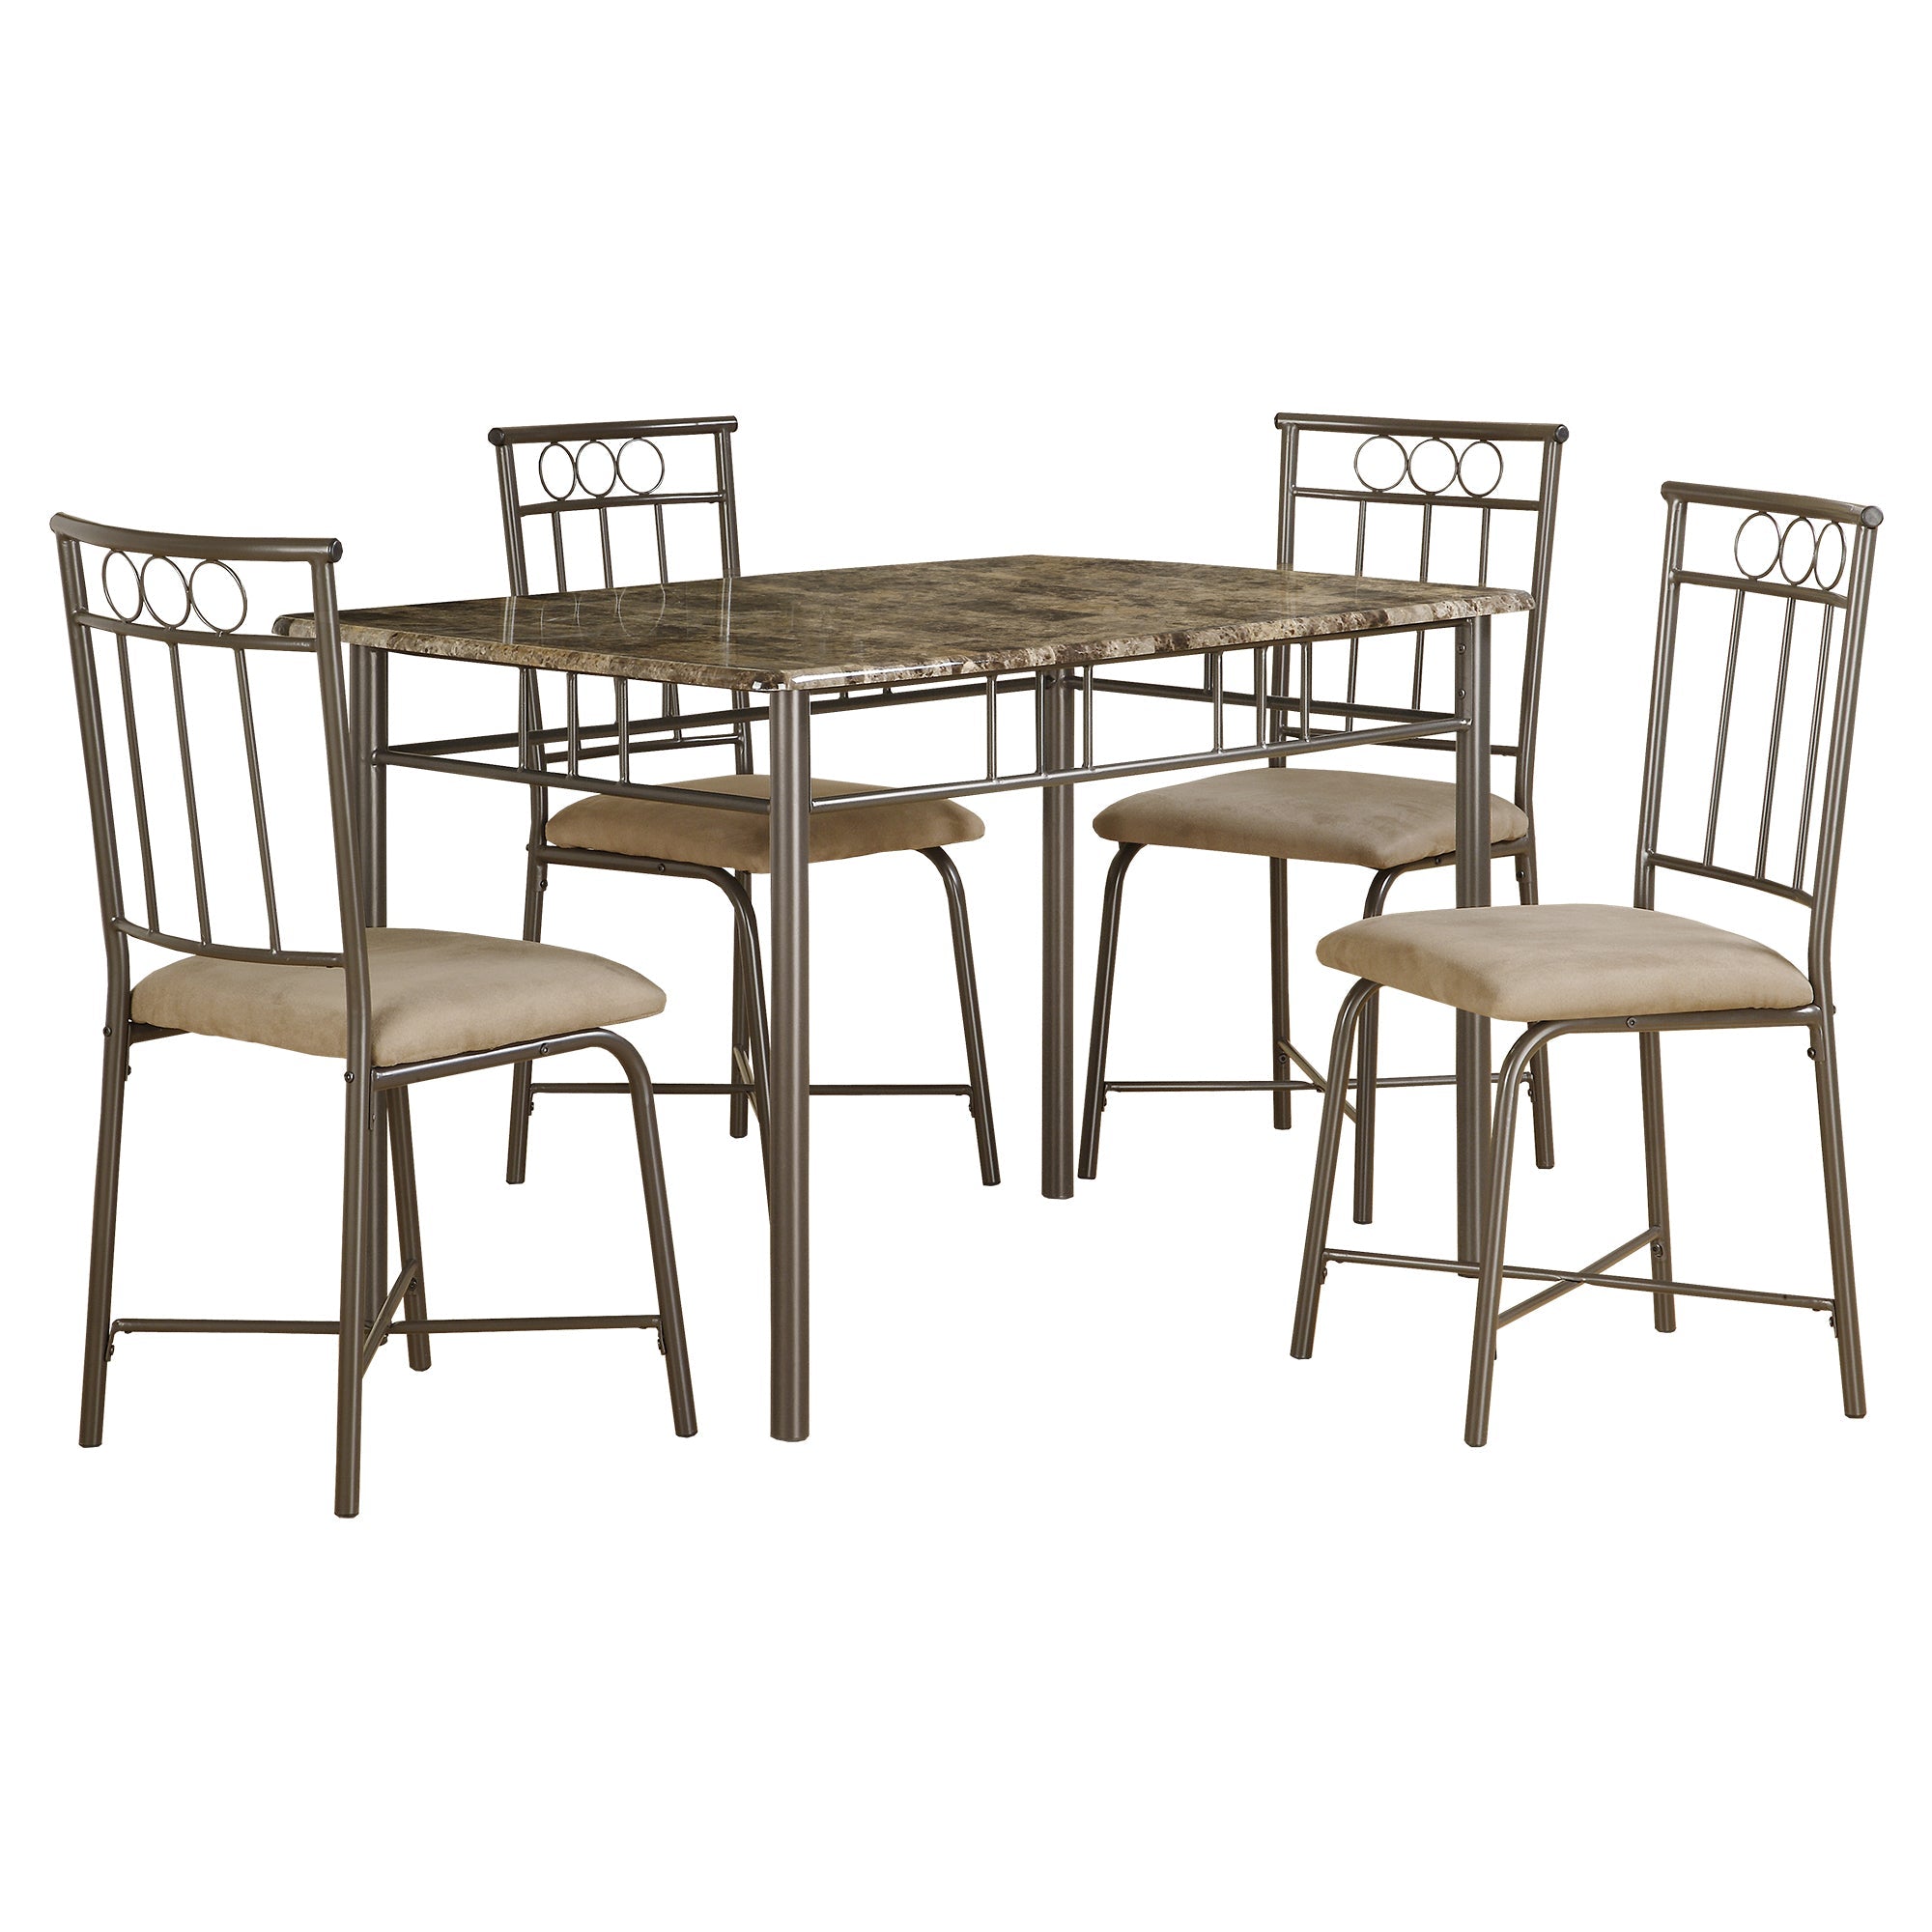 63.5" X 81" X 101" Cappuccino Microfiber Foam And Mdf 5Pcs Dining Set - Tuesday Morning-Dining Sets